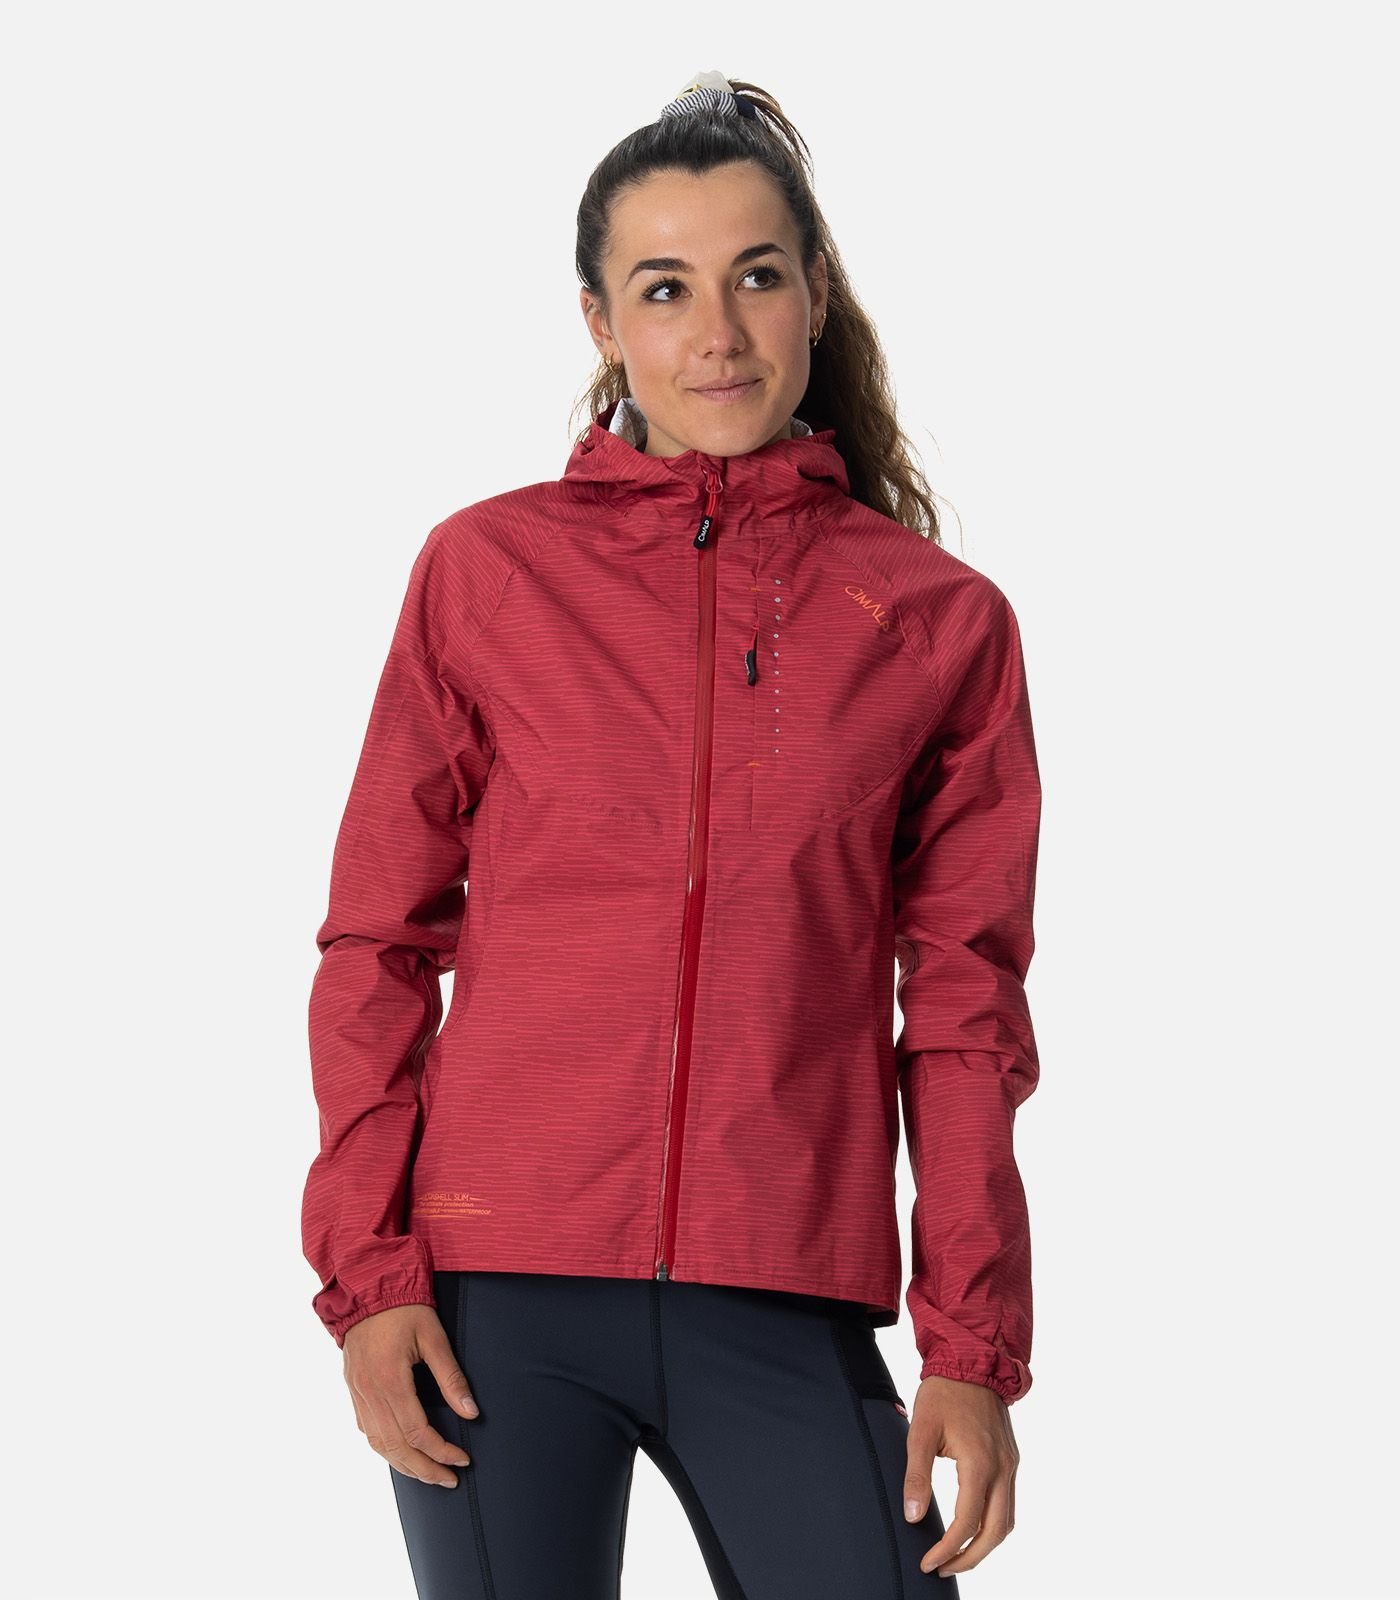 Chaqueta de trail running impermeable y transpirable